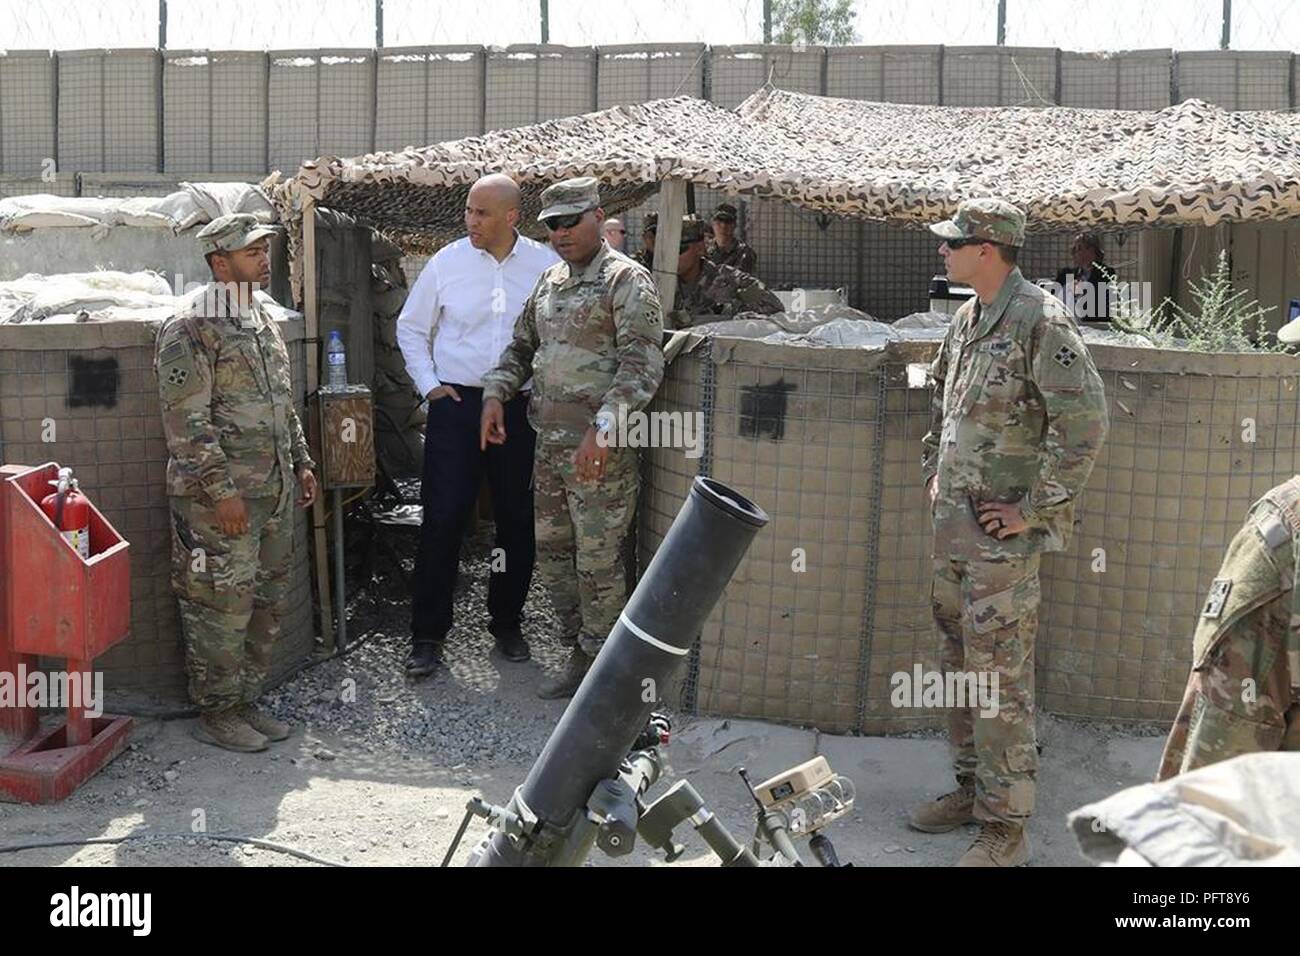 FORWARD OPERATING BASE GAMBERI, Afghanistan (May 26, 2018) – U.S. Sen. Cory Booker meets with soldiers during a visit to Train, Advise, Assist Command - East, Forward Operating Base Gamberi, Afghanistan, May 26, 2018. Booker's visit was part of a tour of the Afghanistan theater which also consisted of meetings with U.S. Army Gen. John Nicholson, commander, Resolute Support, U.S. State Department officials and members of the Afghan press. (TAAC-E Stock Photo